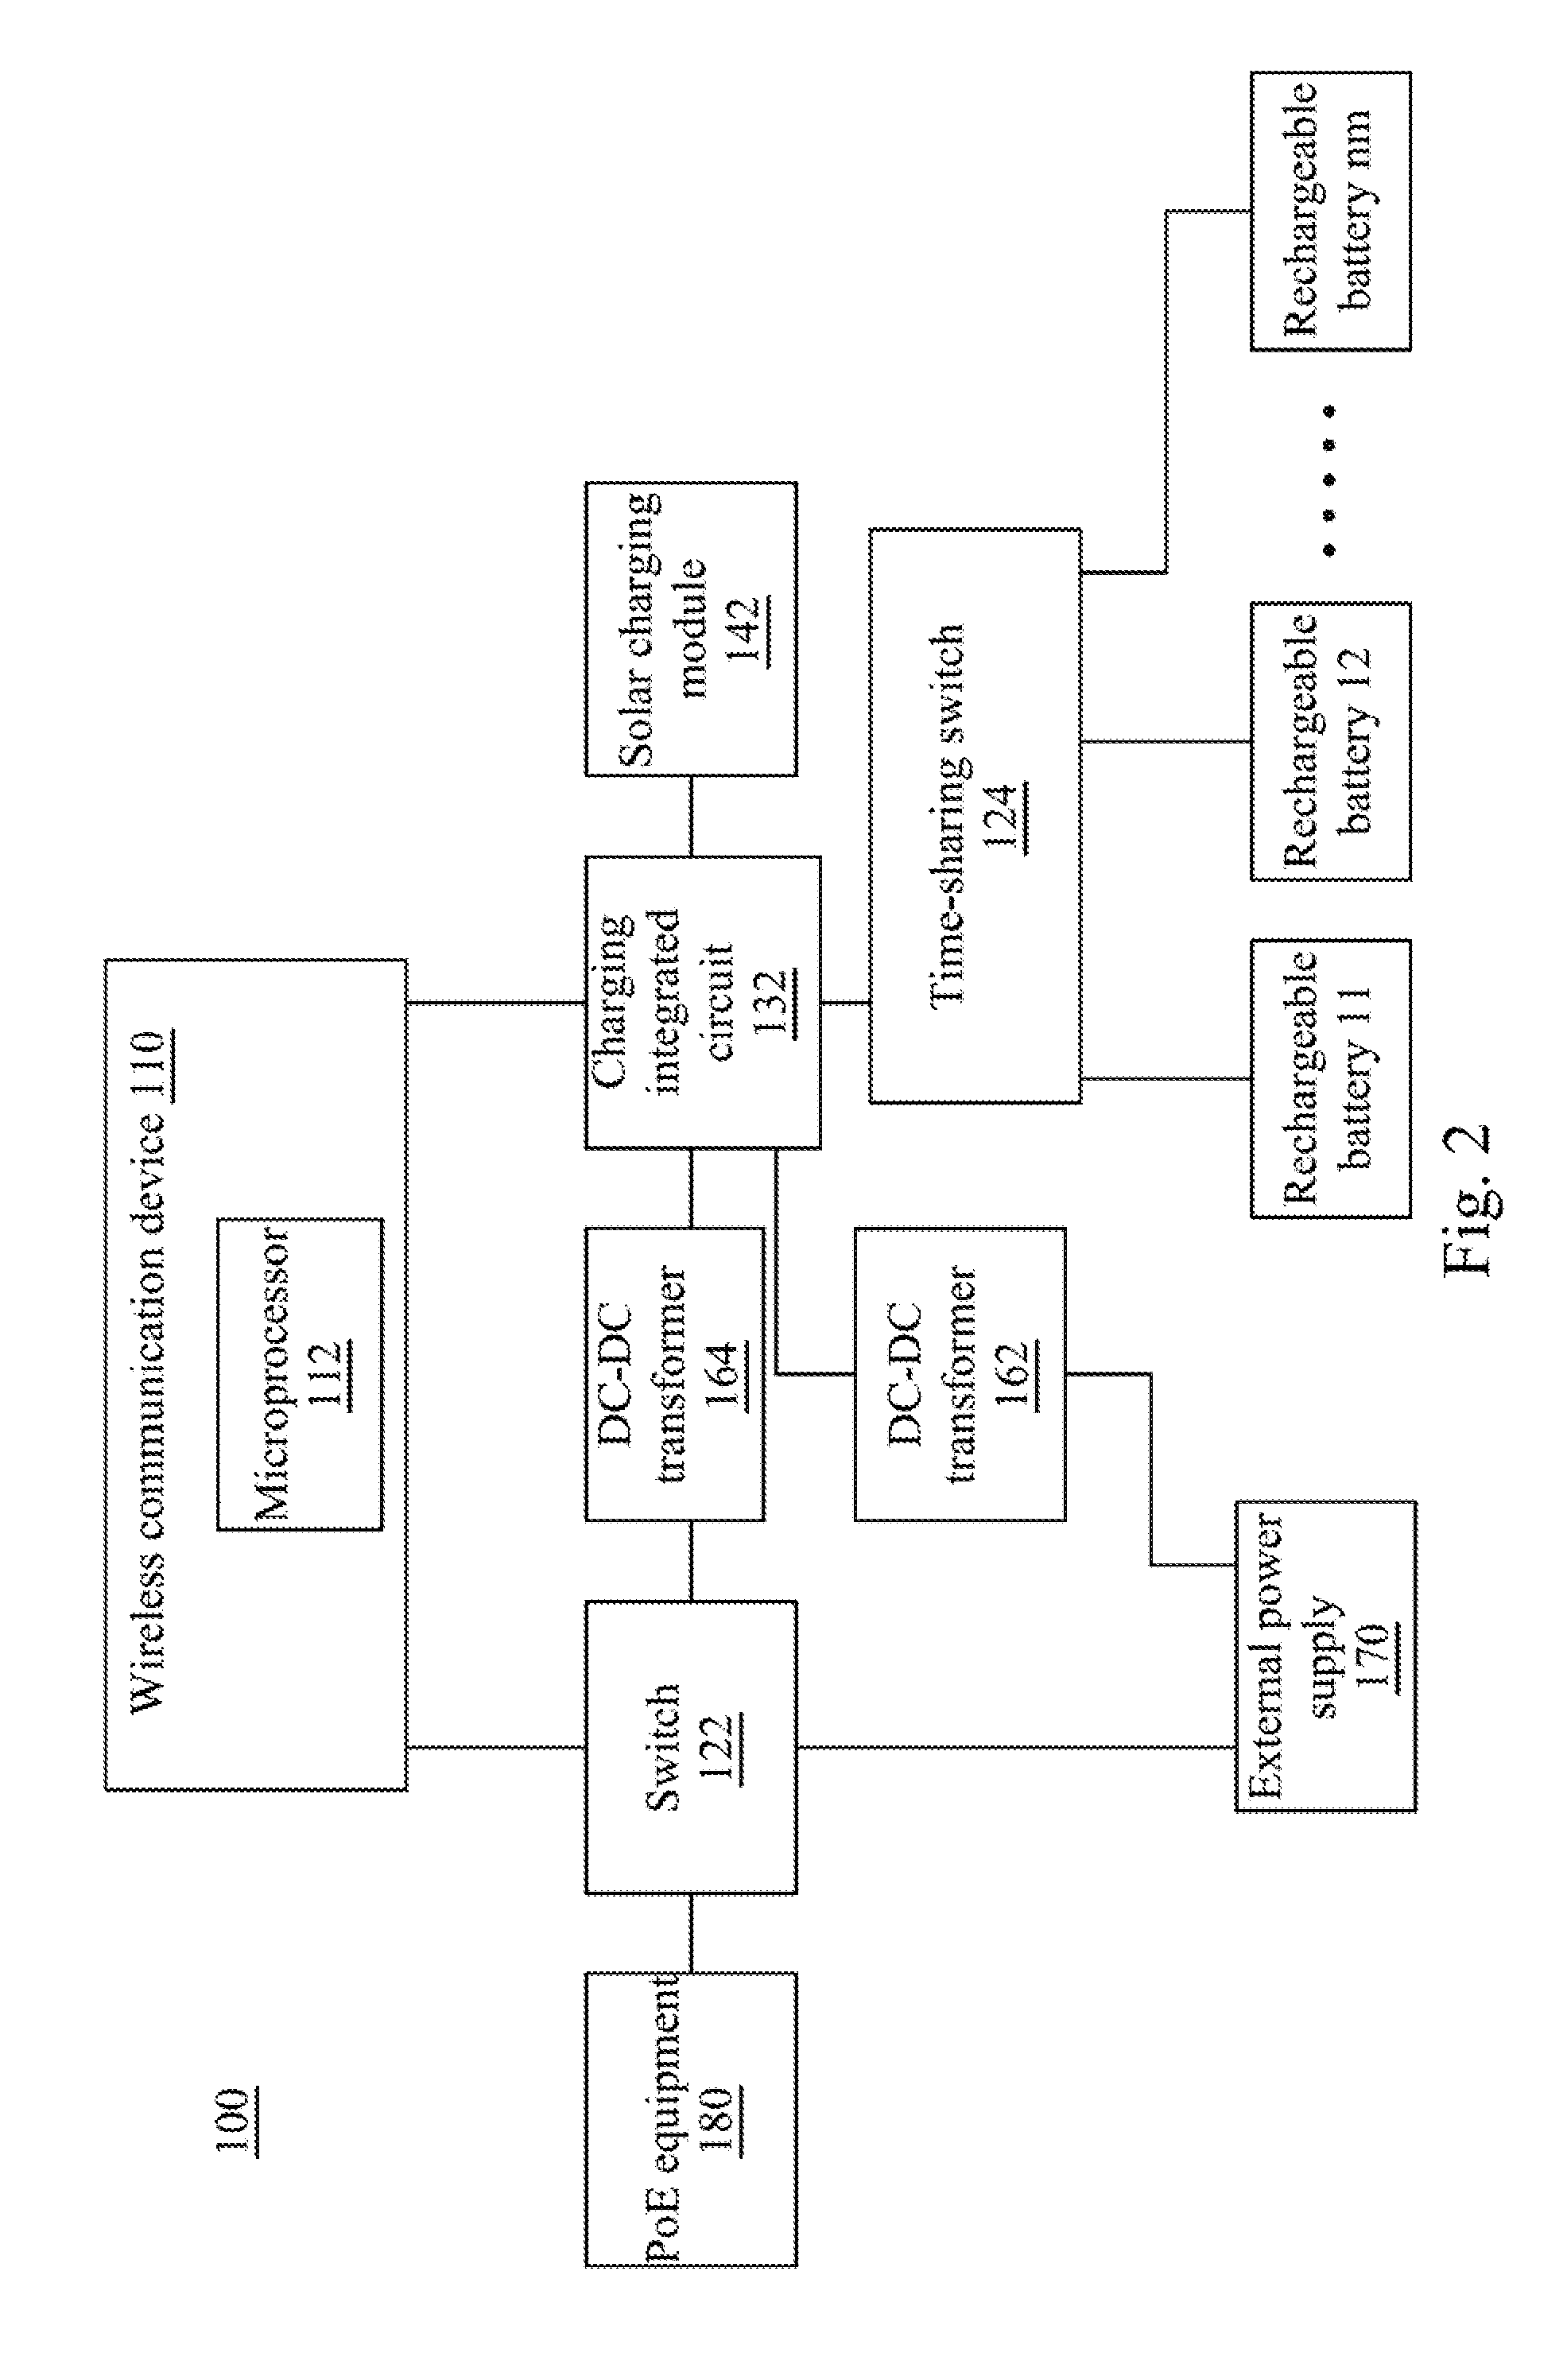 Power supply system of wireless communication device